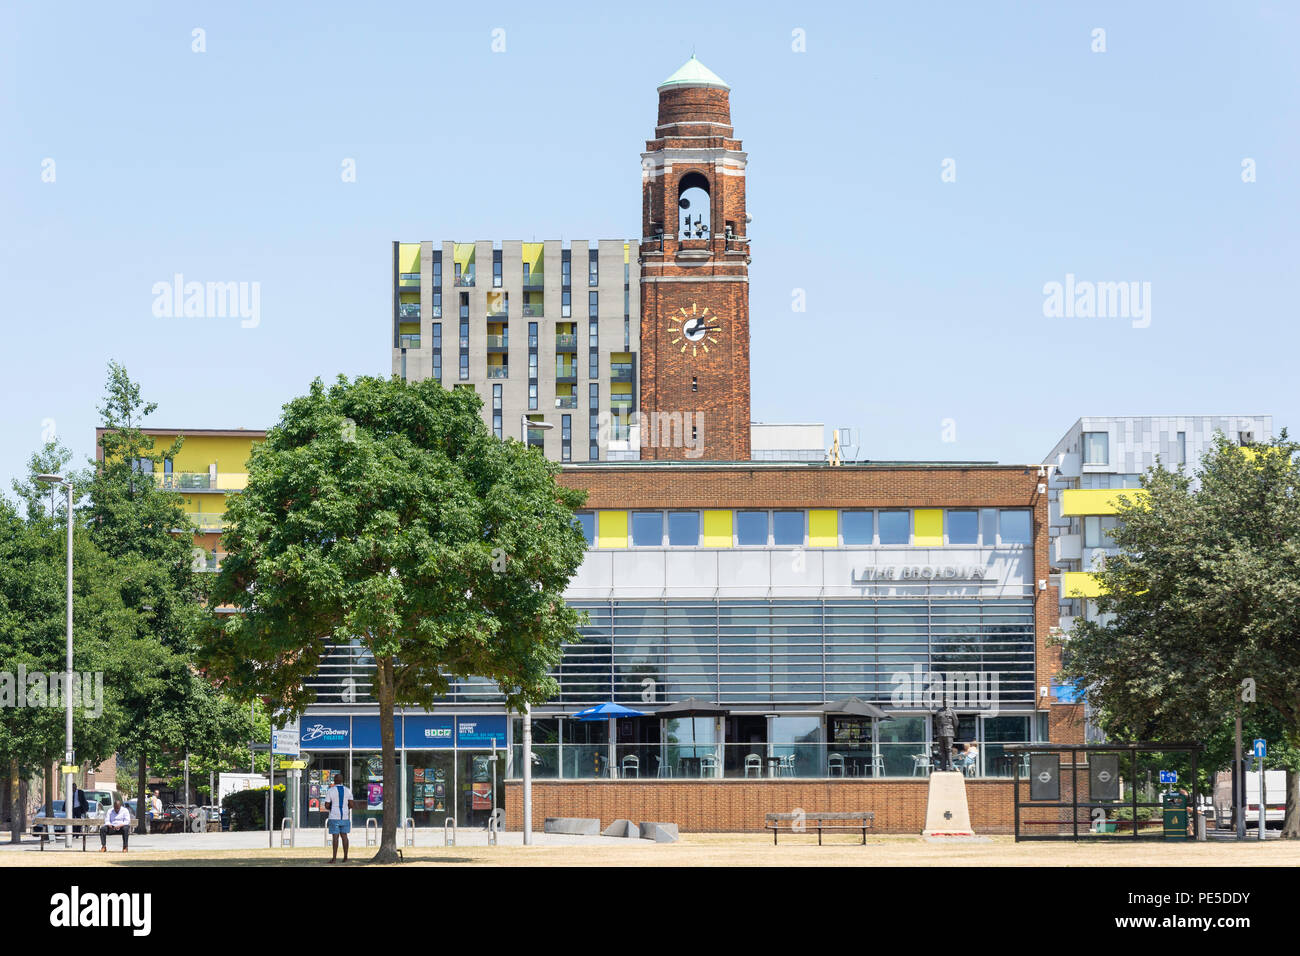 The Broadway Theatre and Town Hall clock tower, Broadway, Barking, London Borough of Barking and Dagenham, Greater London, England, United Kingdom Stock Photo